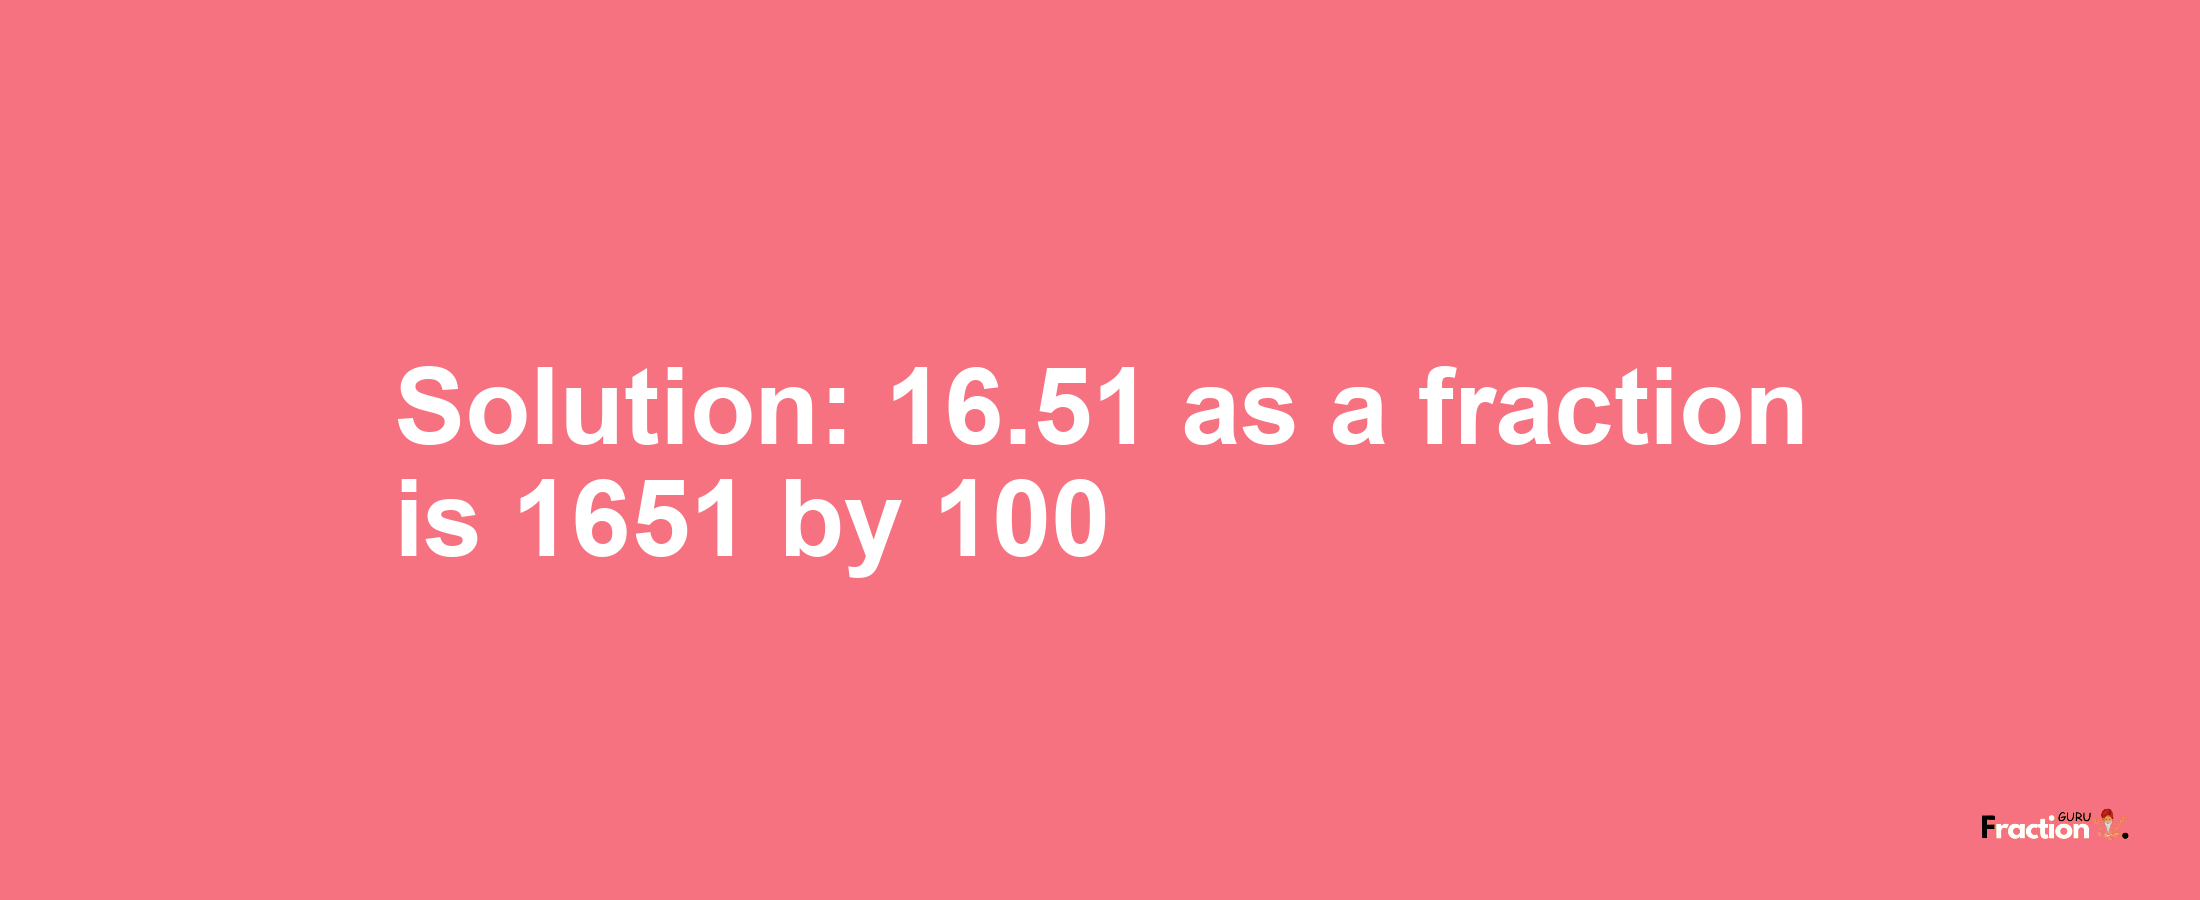 Solution:16.51 as a fraction is 1651/100